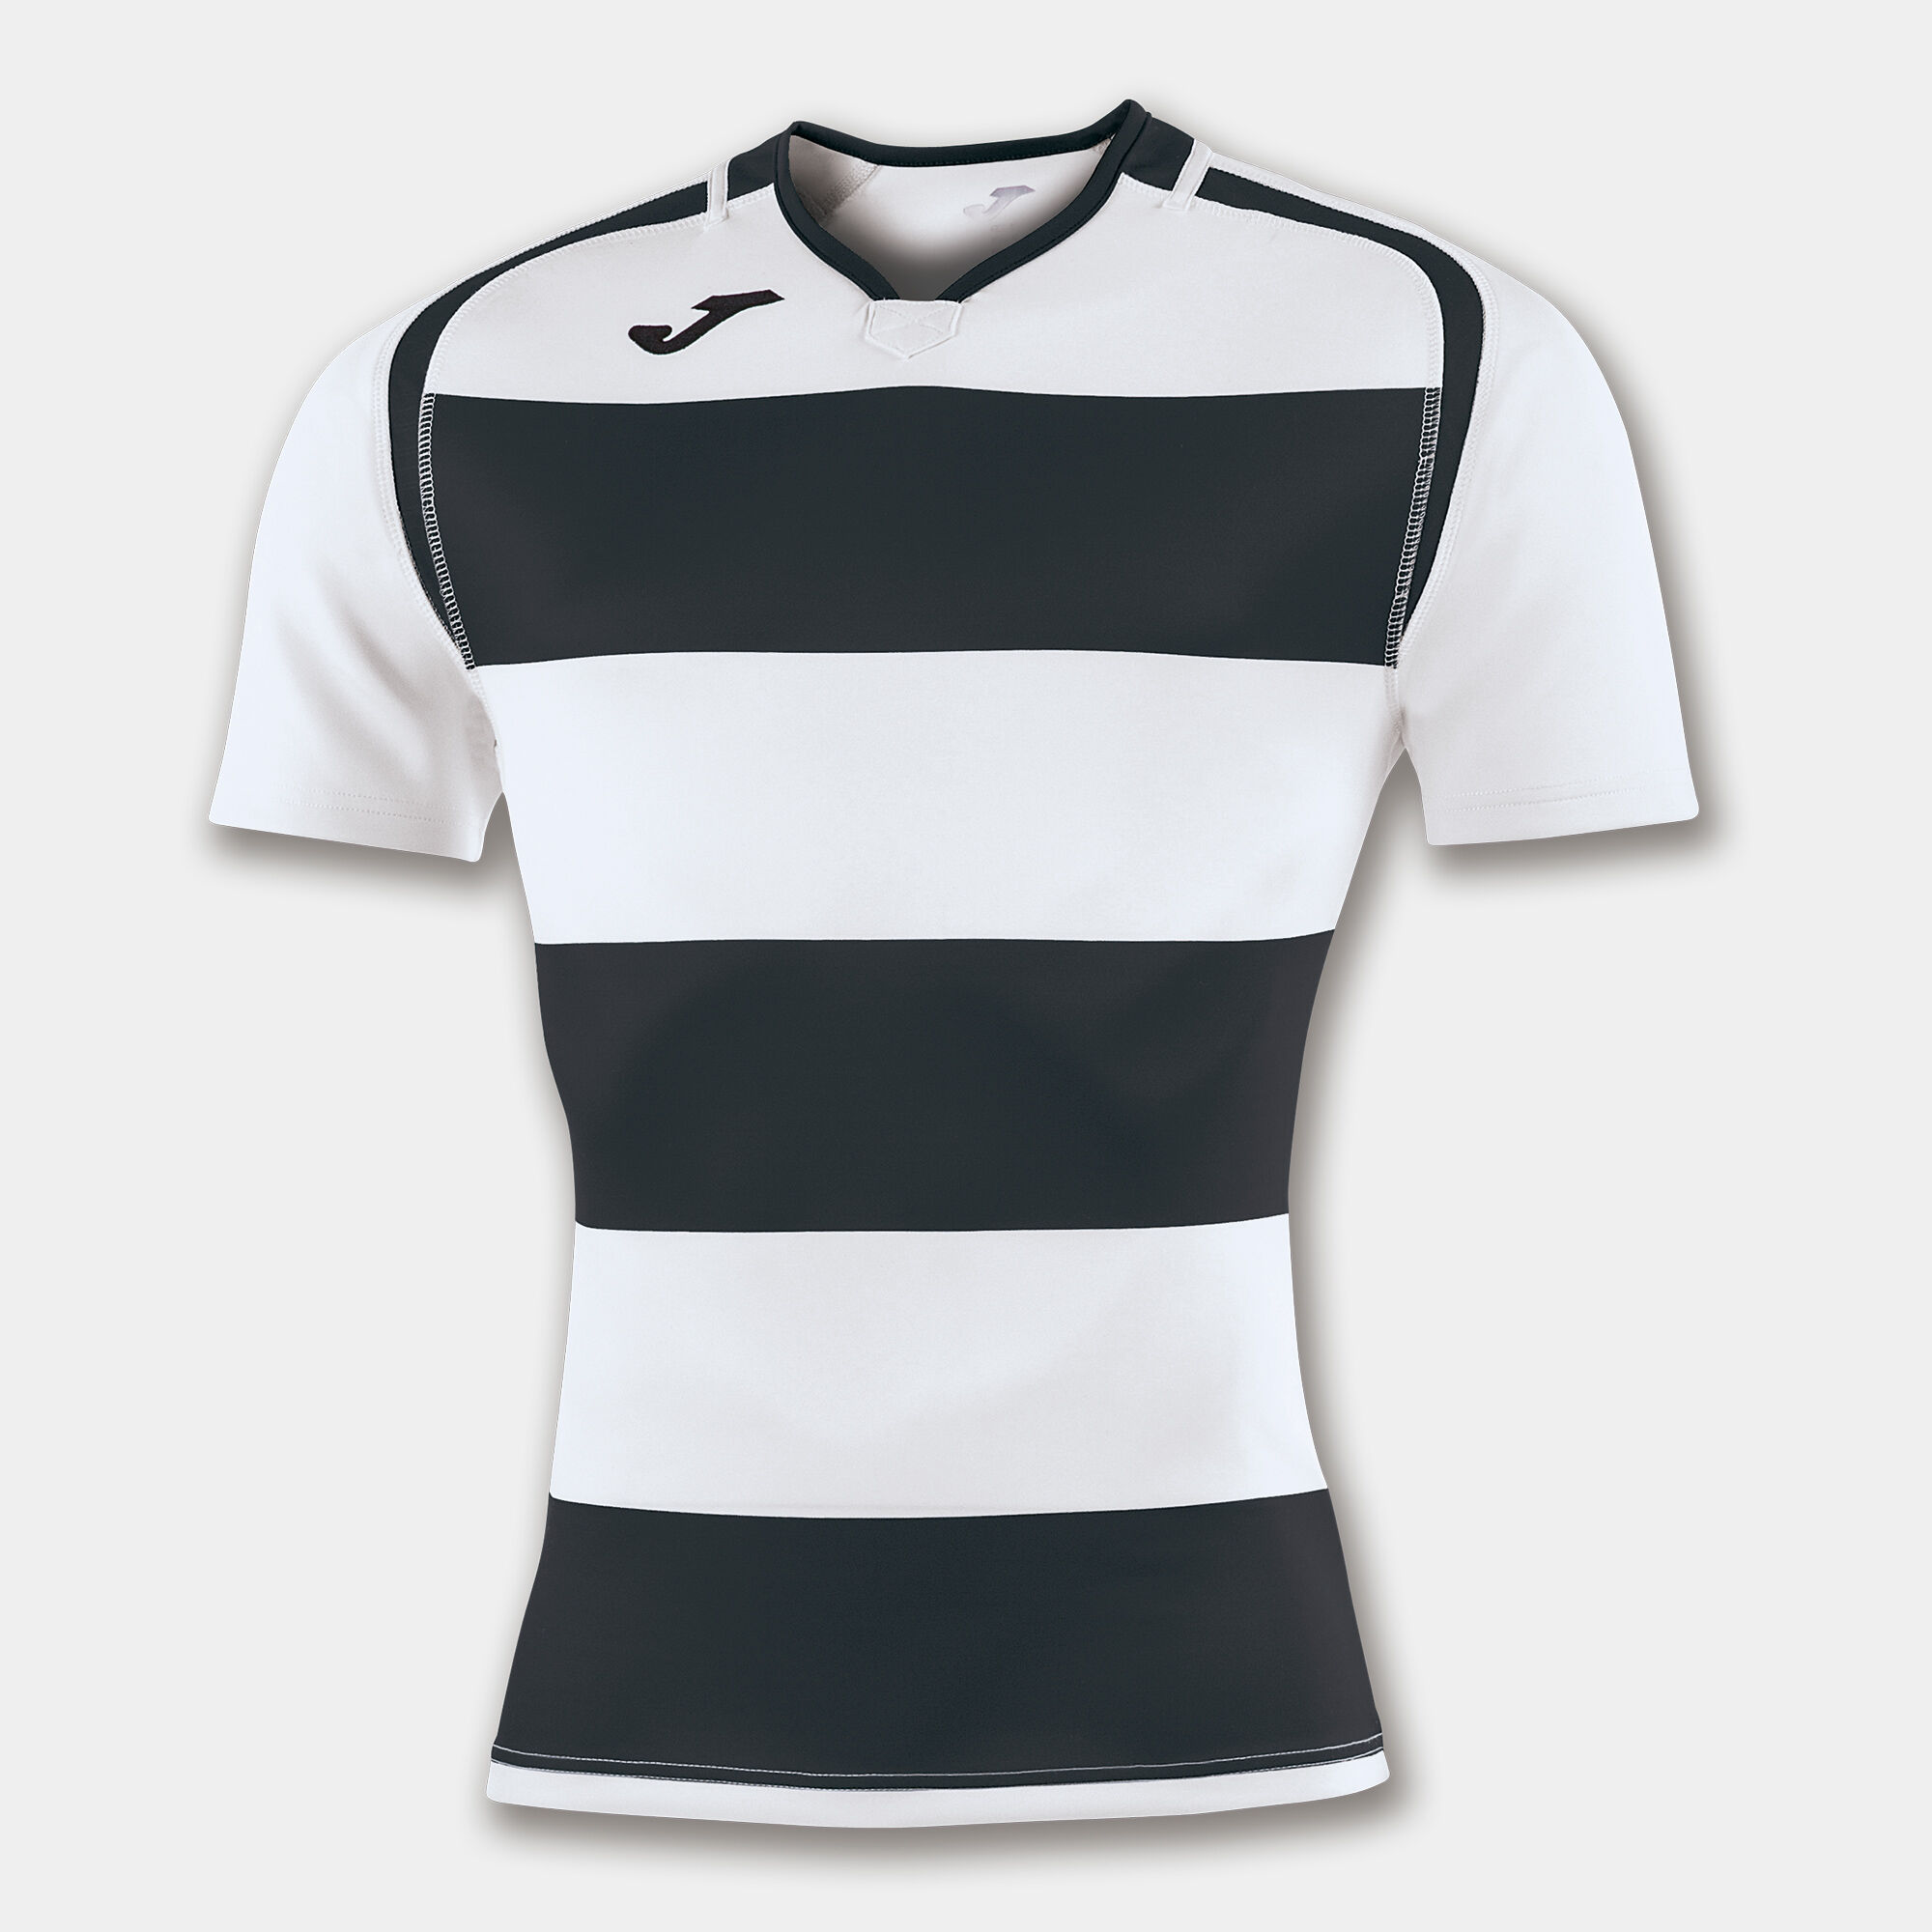 Maillot manches courtes homme Prorugby II noir blanc